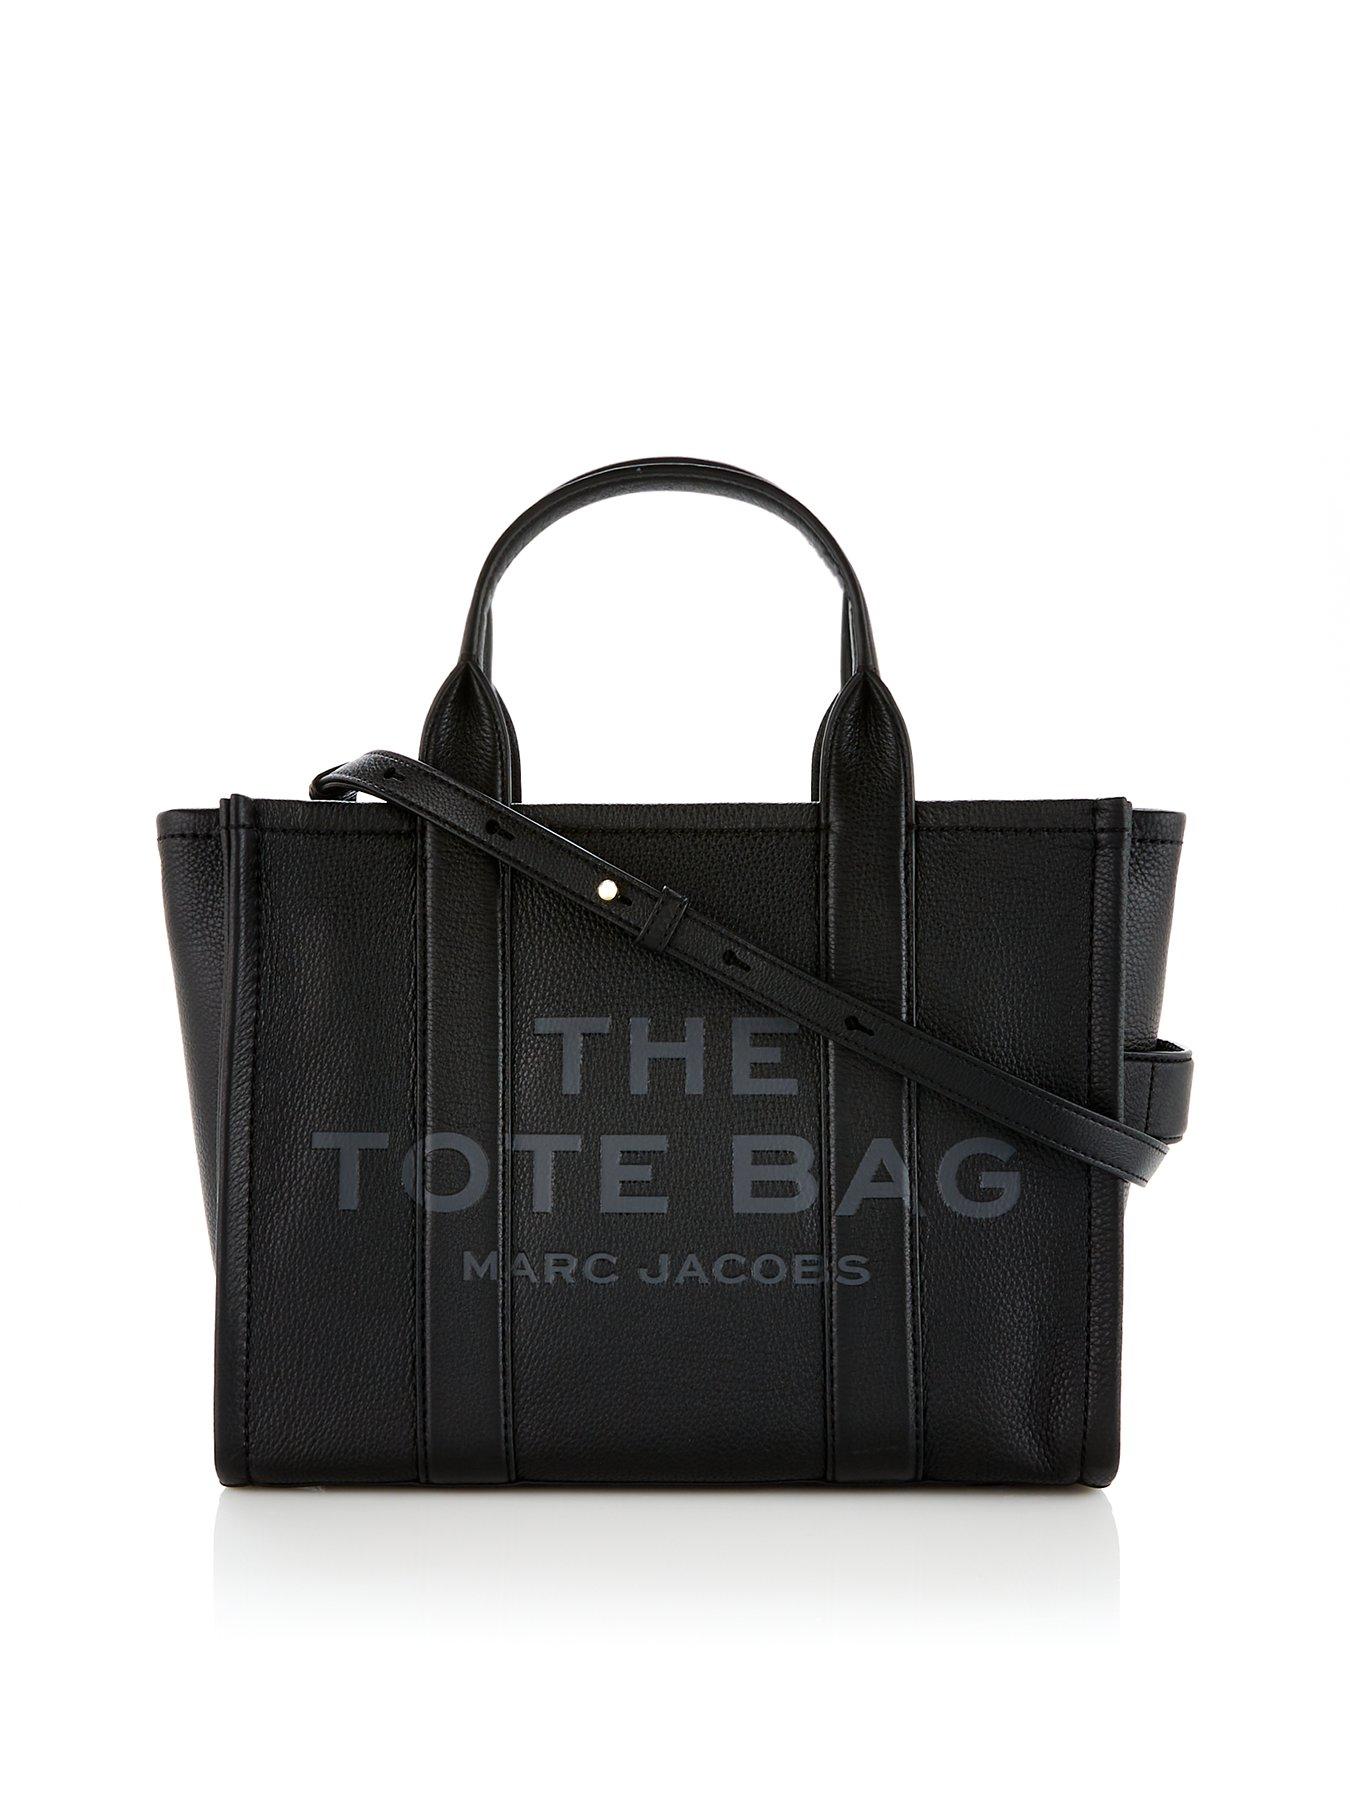 Marc Jacobs The Leather Micro Tote Bag in Rose- LUXE Accessories